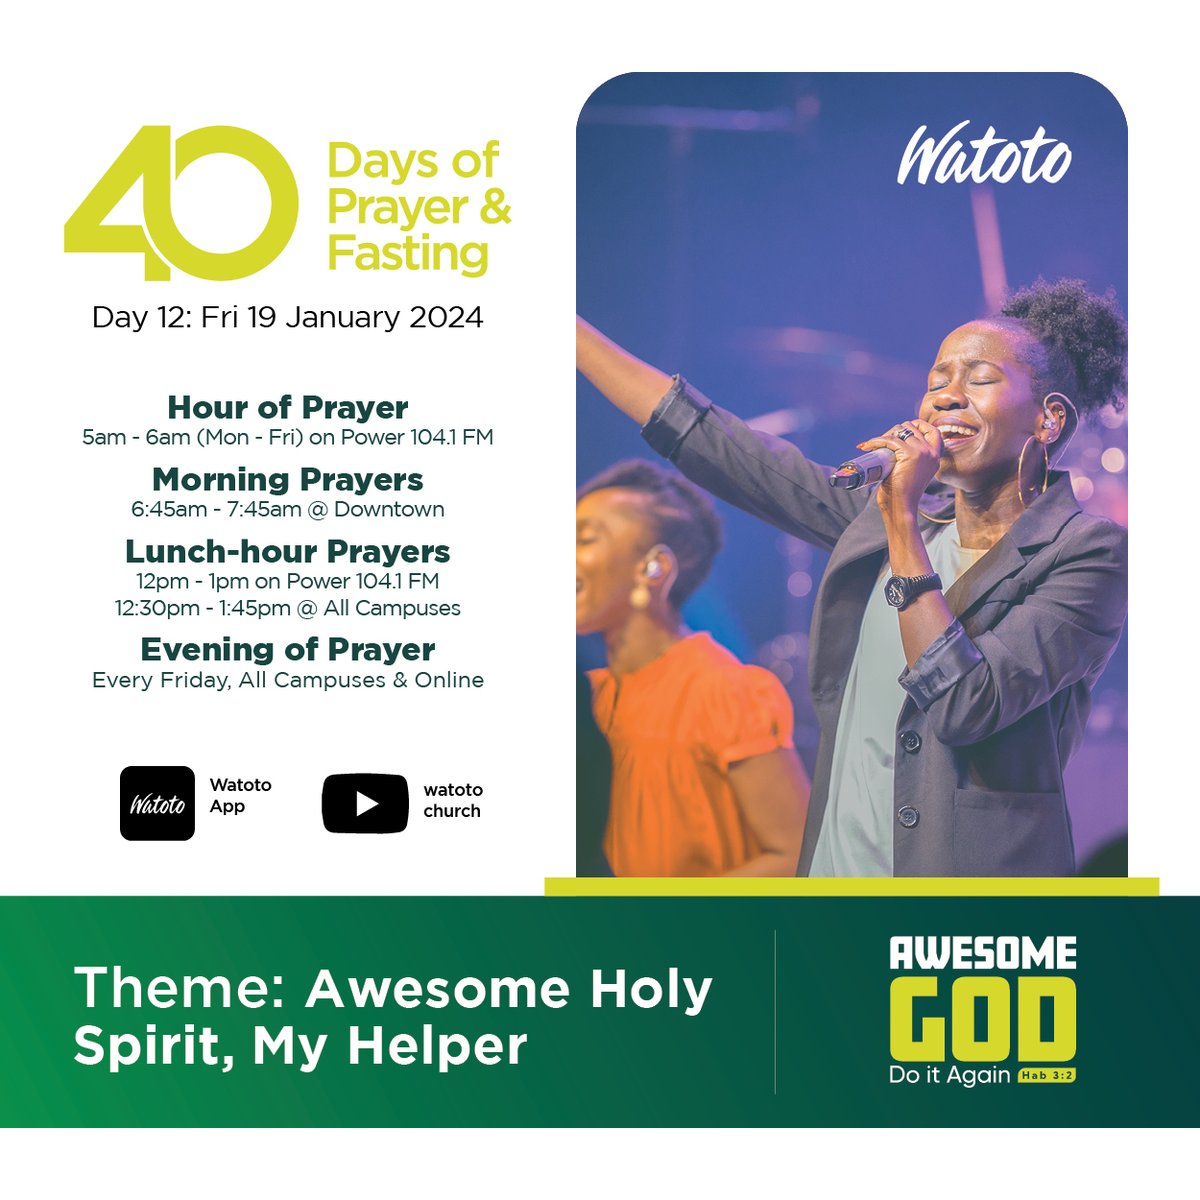 If you feel empty, weak, tired, defeated, inadequate…, Holy Spirit wants to be your helper so you may live a victorious Christian life. Ask Him to fill you. See the prayer guide at watotochurch.com/40days.pdf.